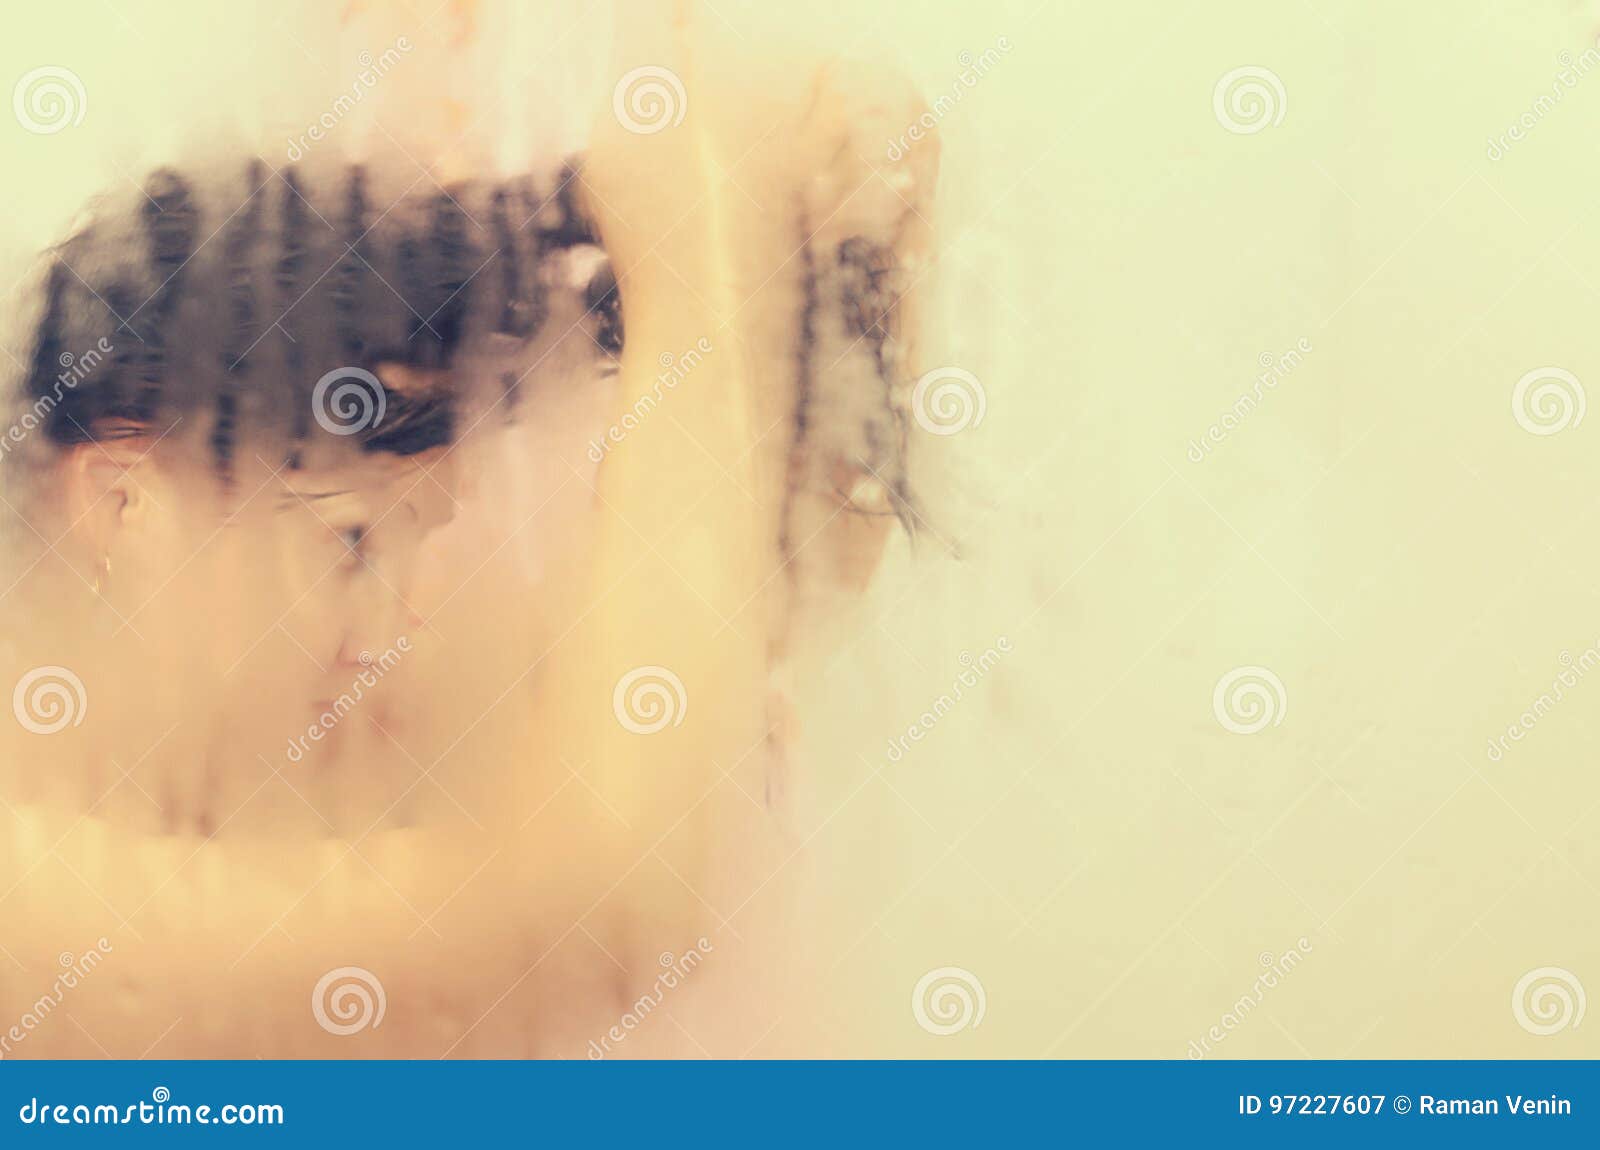 The Girl Takes A Shower In The Bathroom Stock Image Image Of Hair